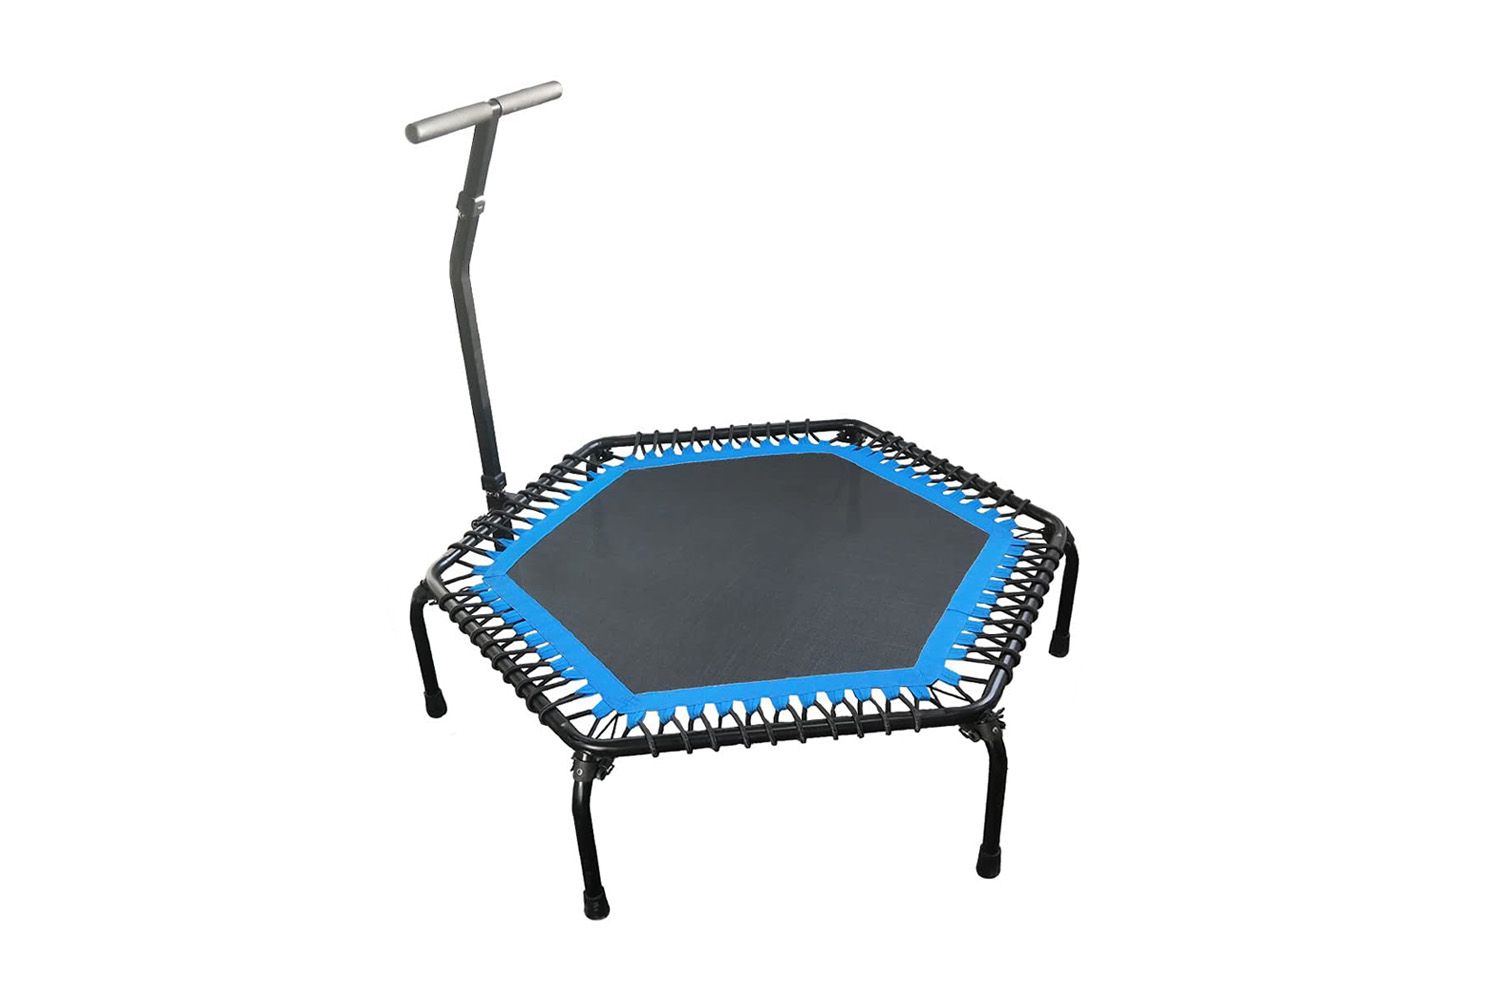 LeikeFitness Professional Gym Workout 50in Fitness Trampoline